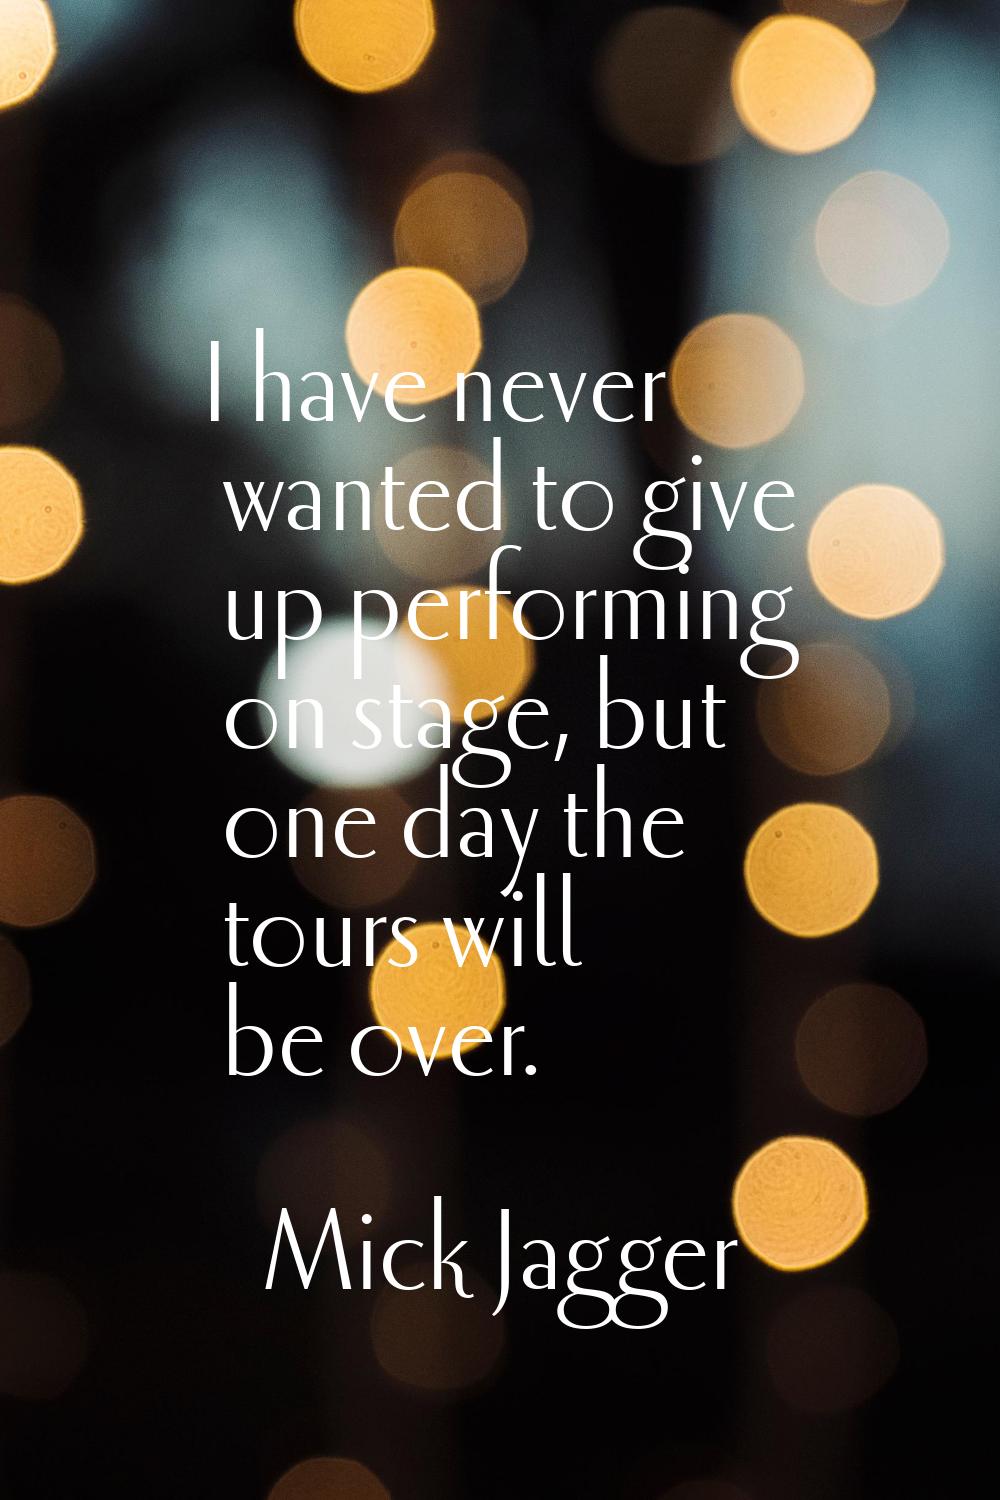 I have never wanted to give up performing on stage, but one day the tours will be over.